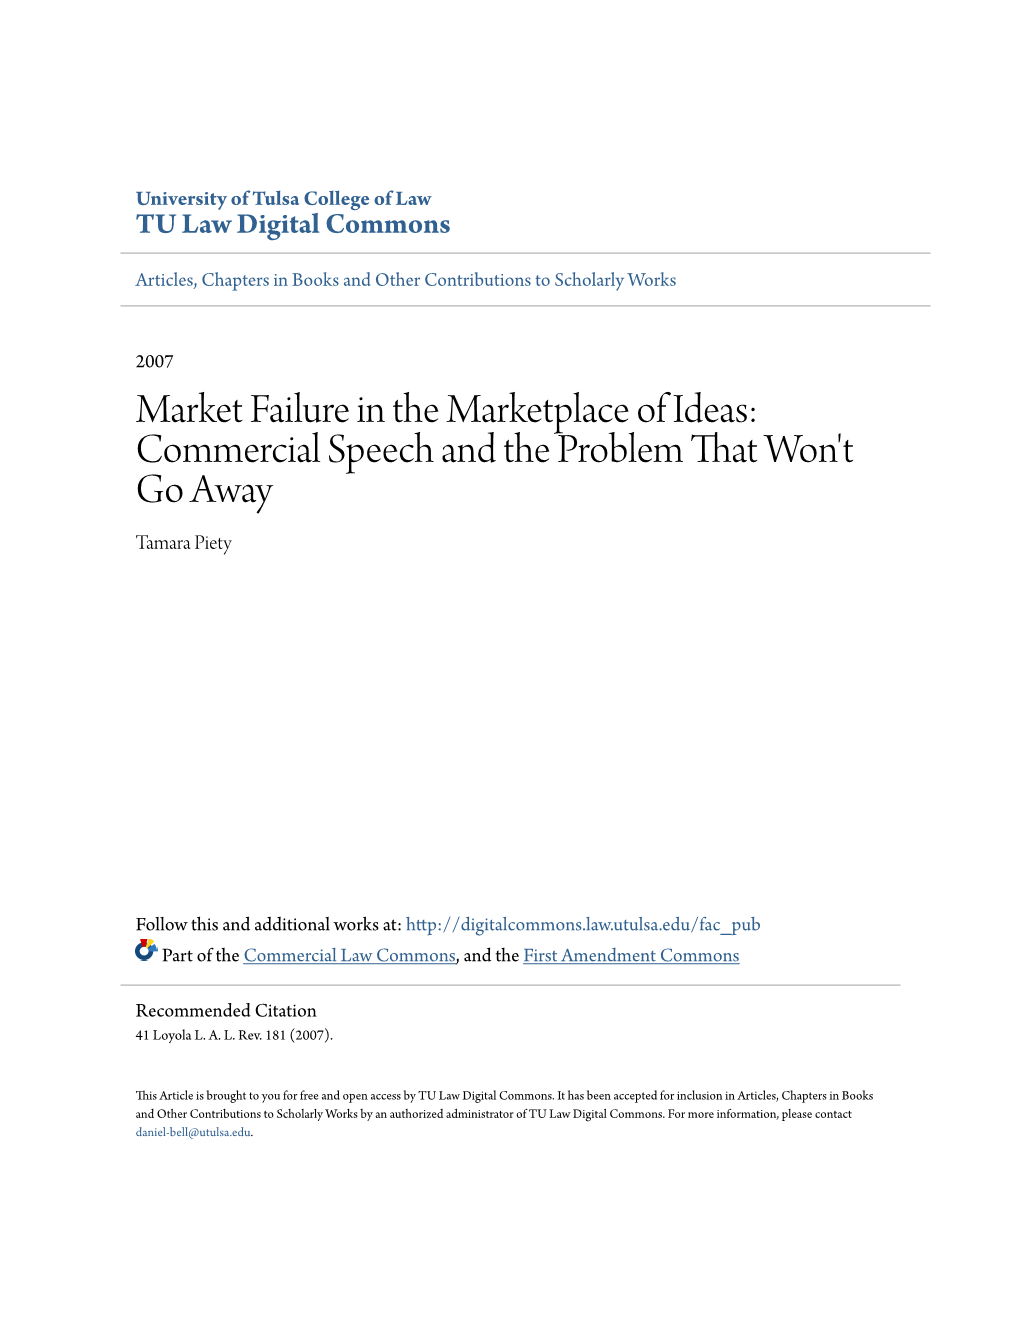 Market Failure in the Marketplace of Ideas: Commercial Speech and the Problem That Won't Go Away Tamara Piety